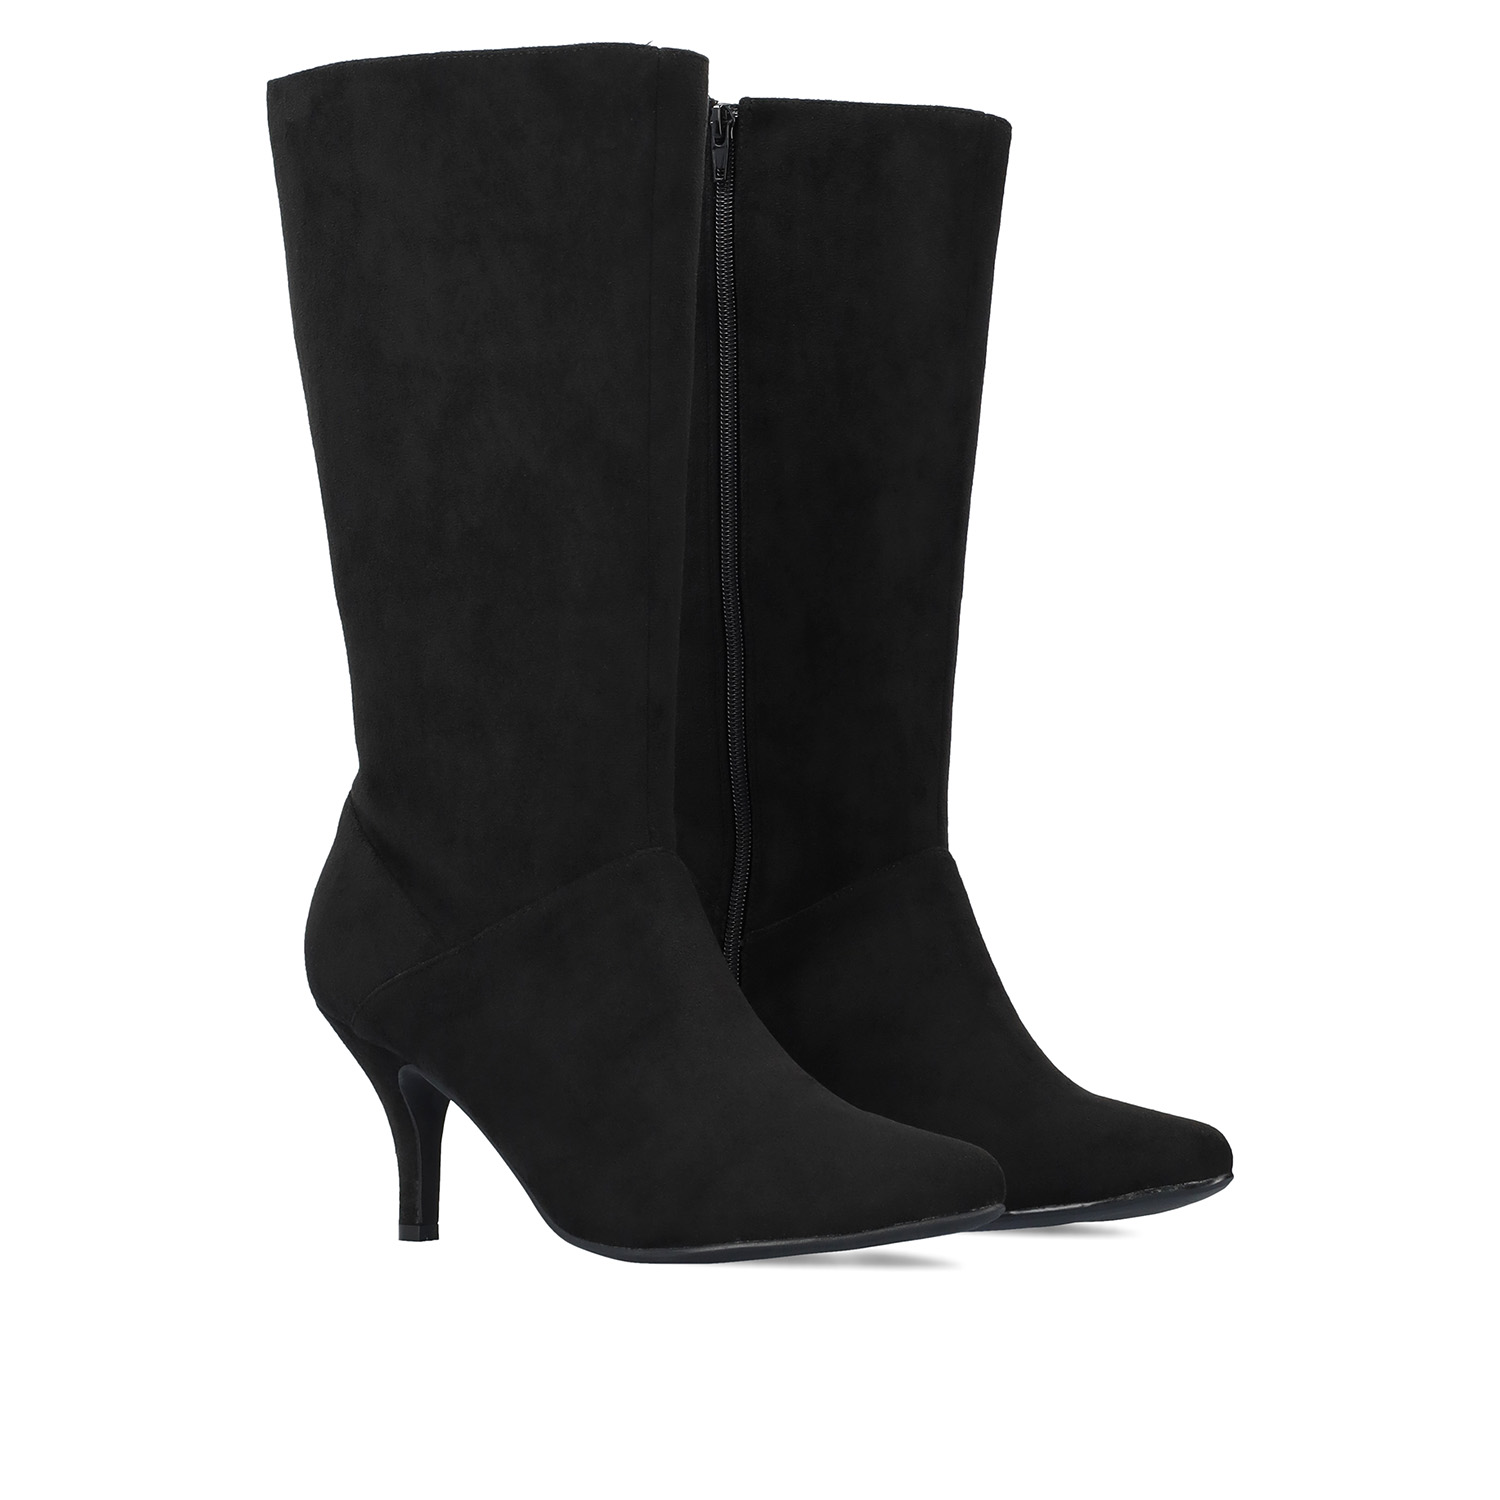 Heeled high boots in black faux suede. 